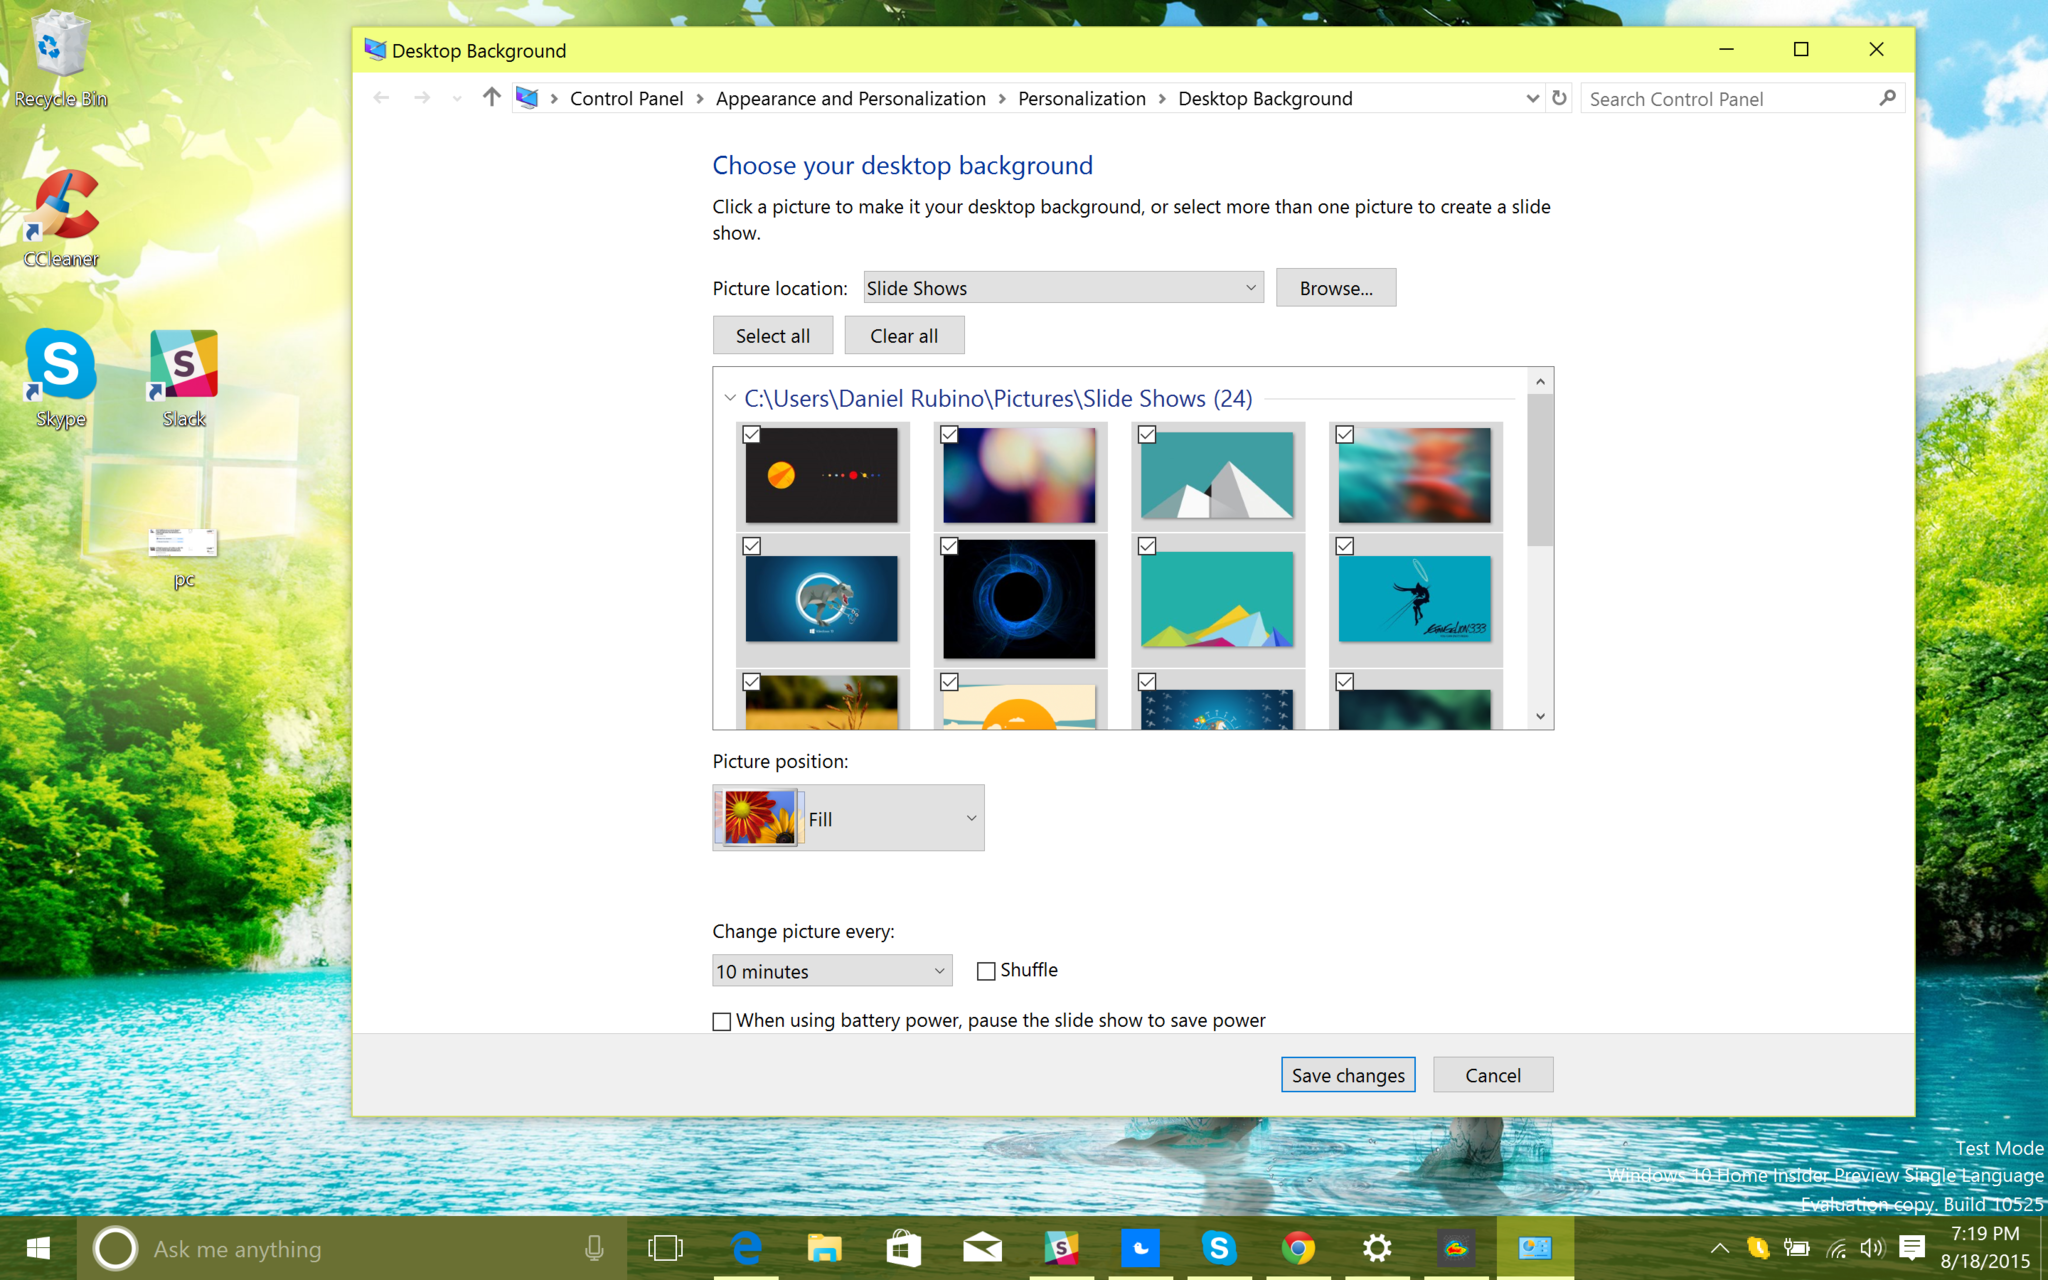 How To Set Slideshow To Every 10 Seconds And Enable Shuffle In Windows 10 Windows Central